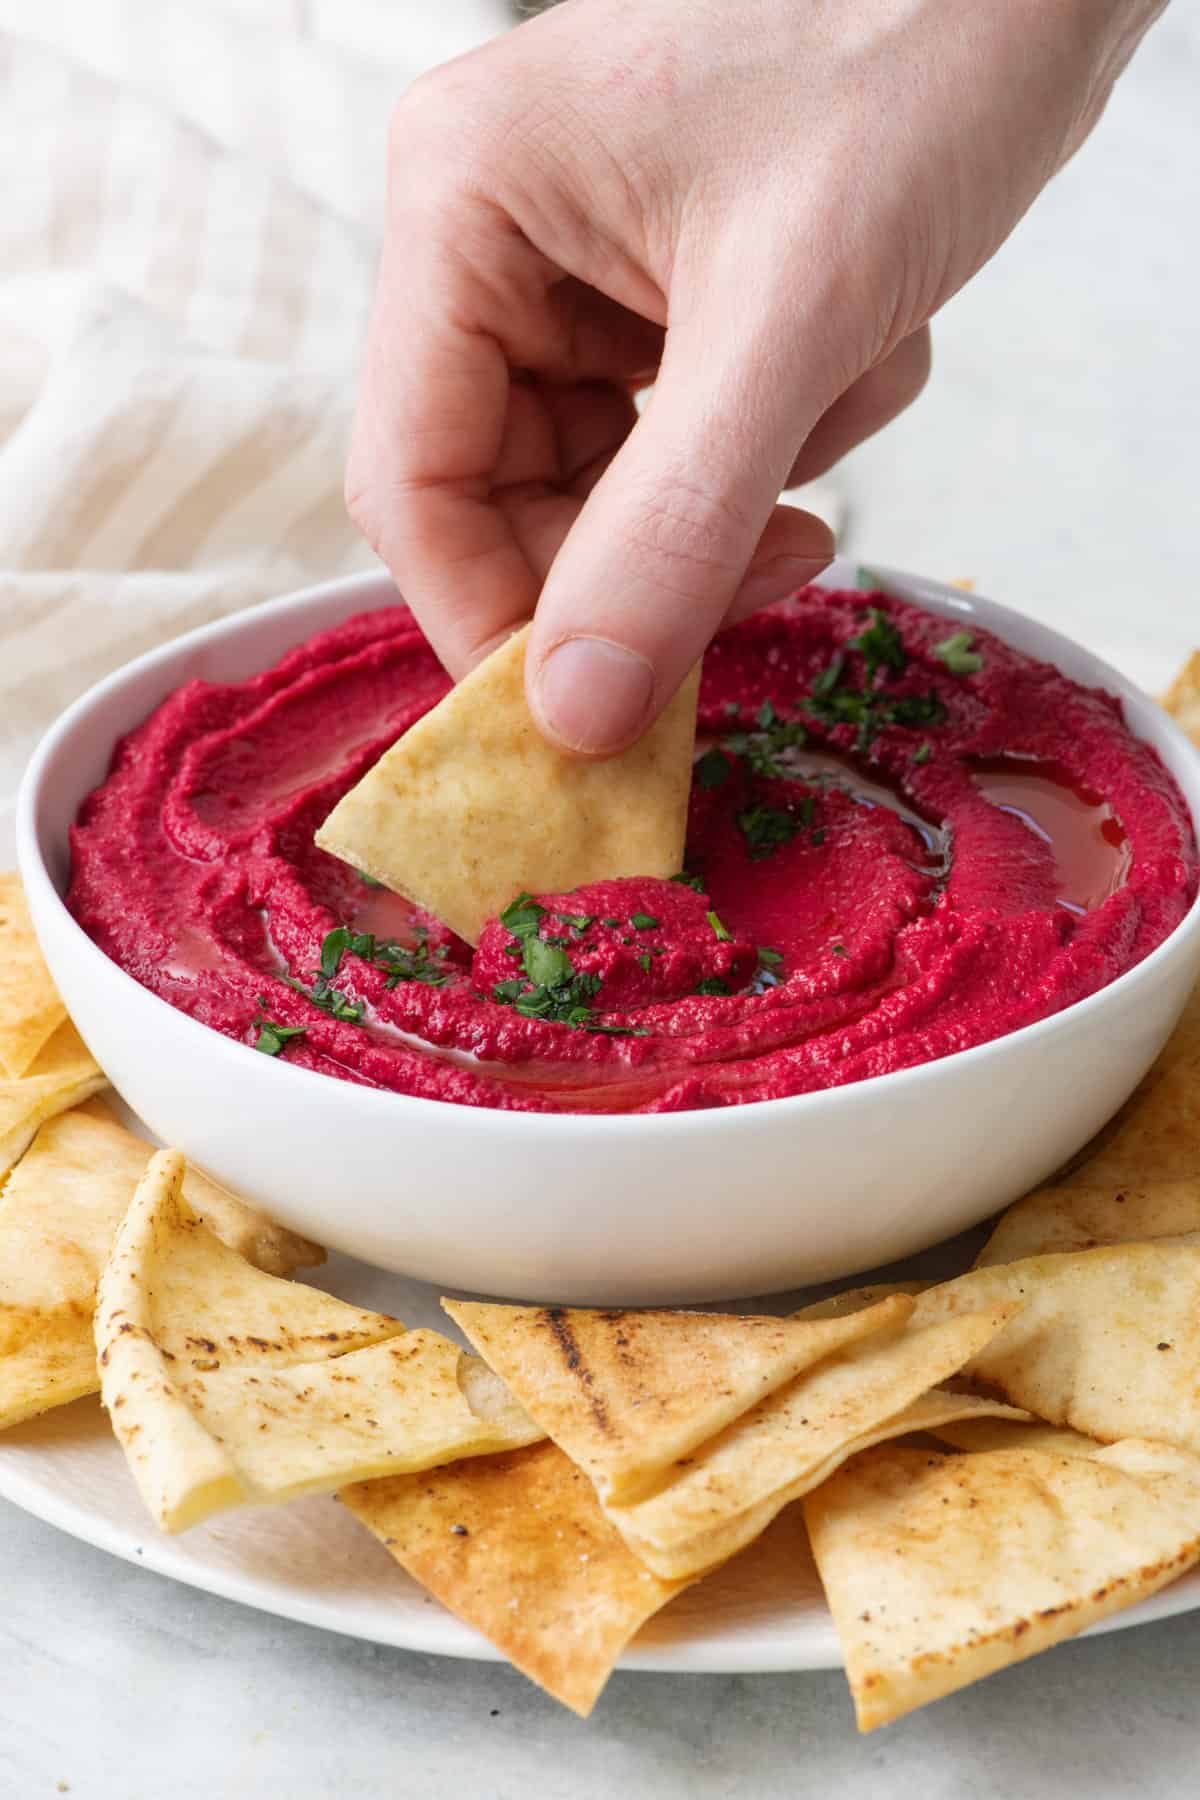 Pita chip being dipped into a dark pink bowl of beet hummus garnished with fresh chopped parsley with more pita chips around.